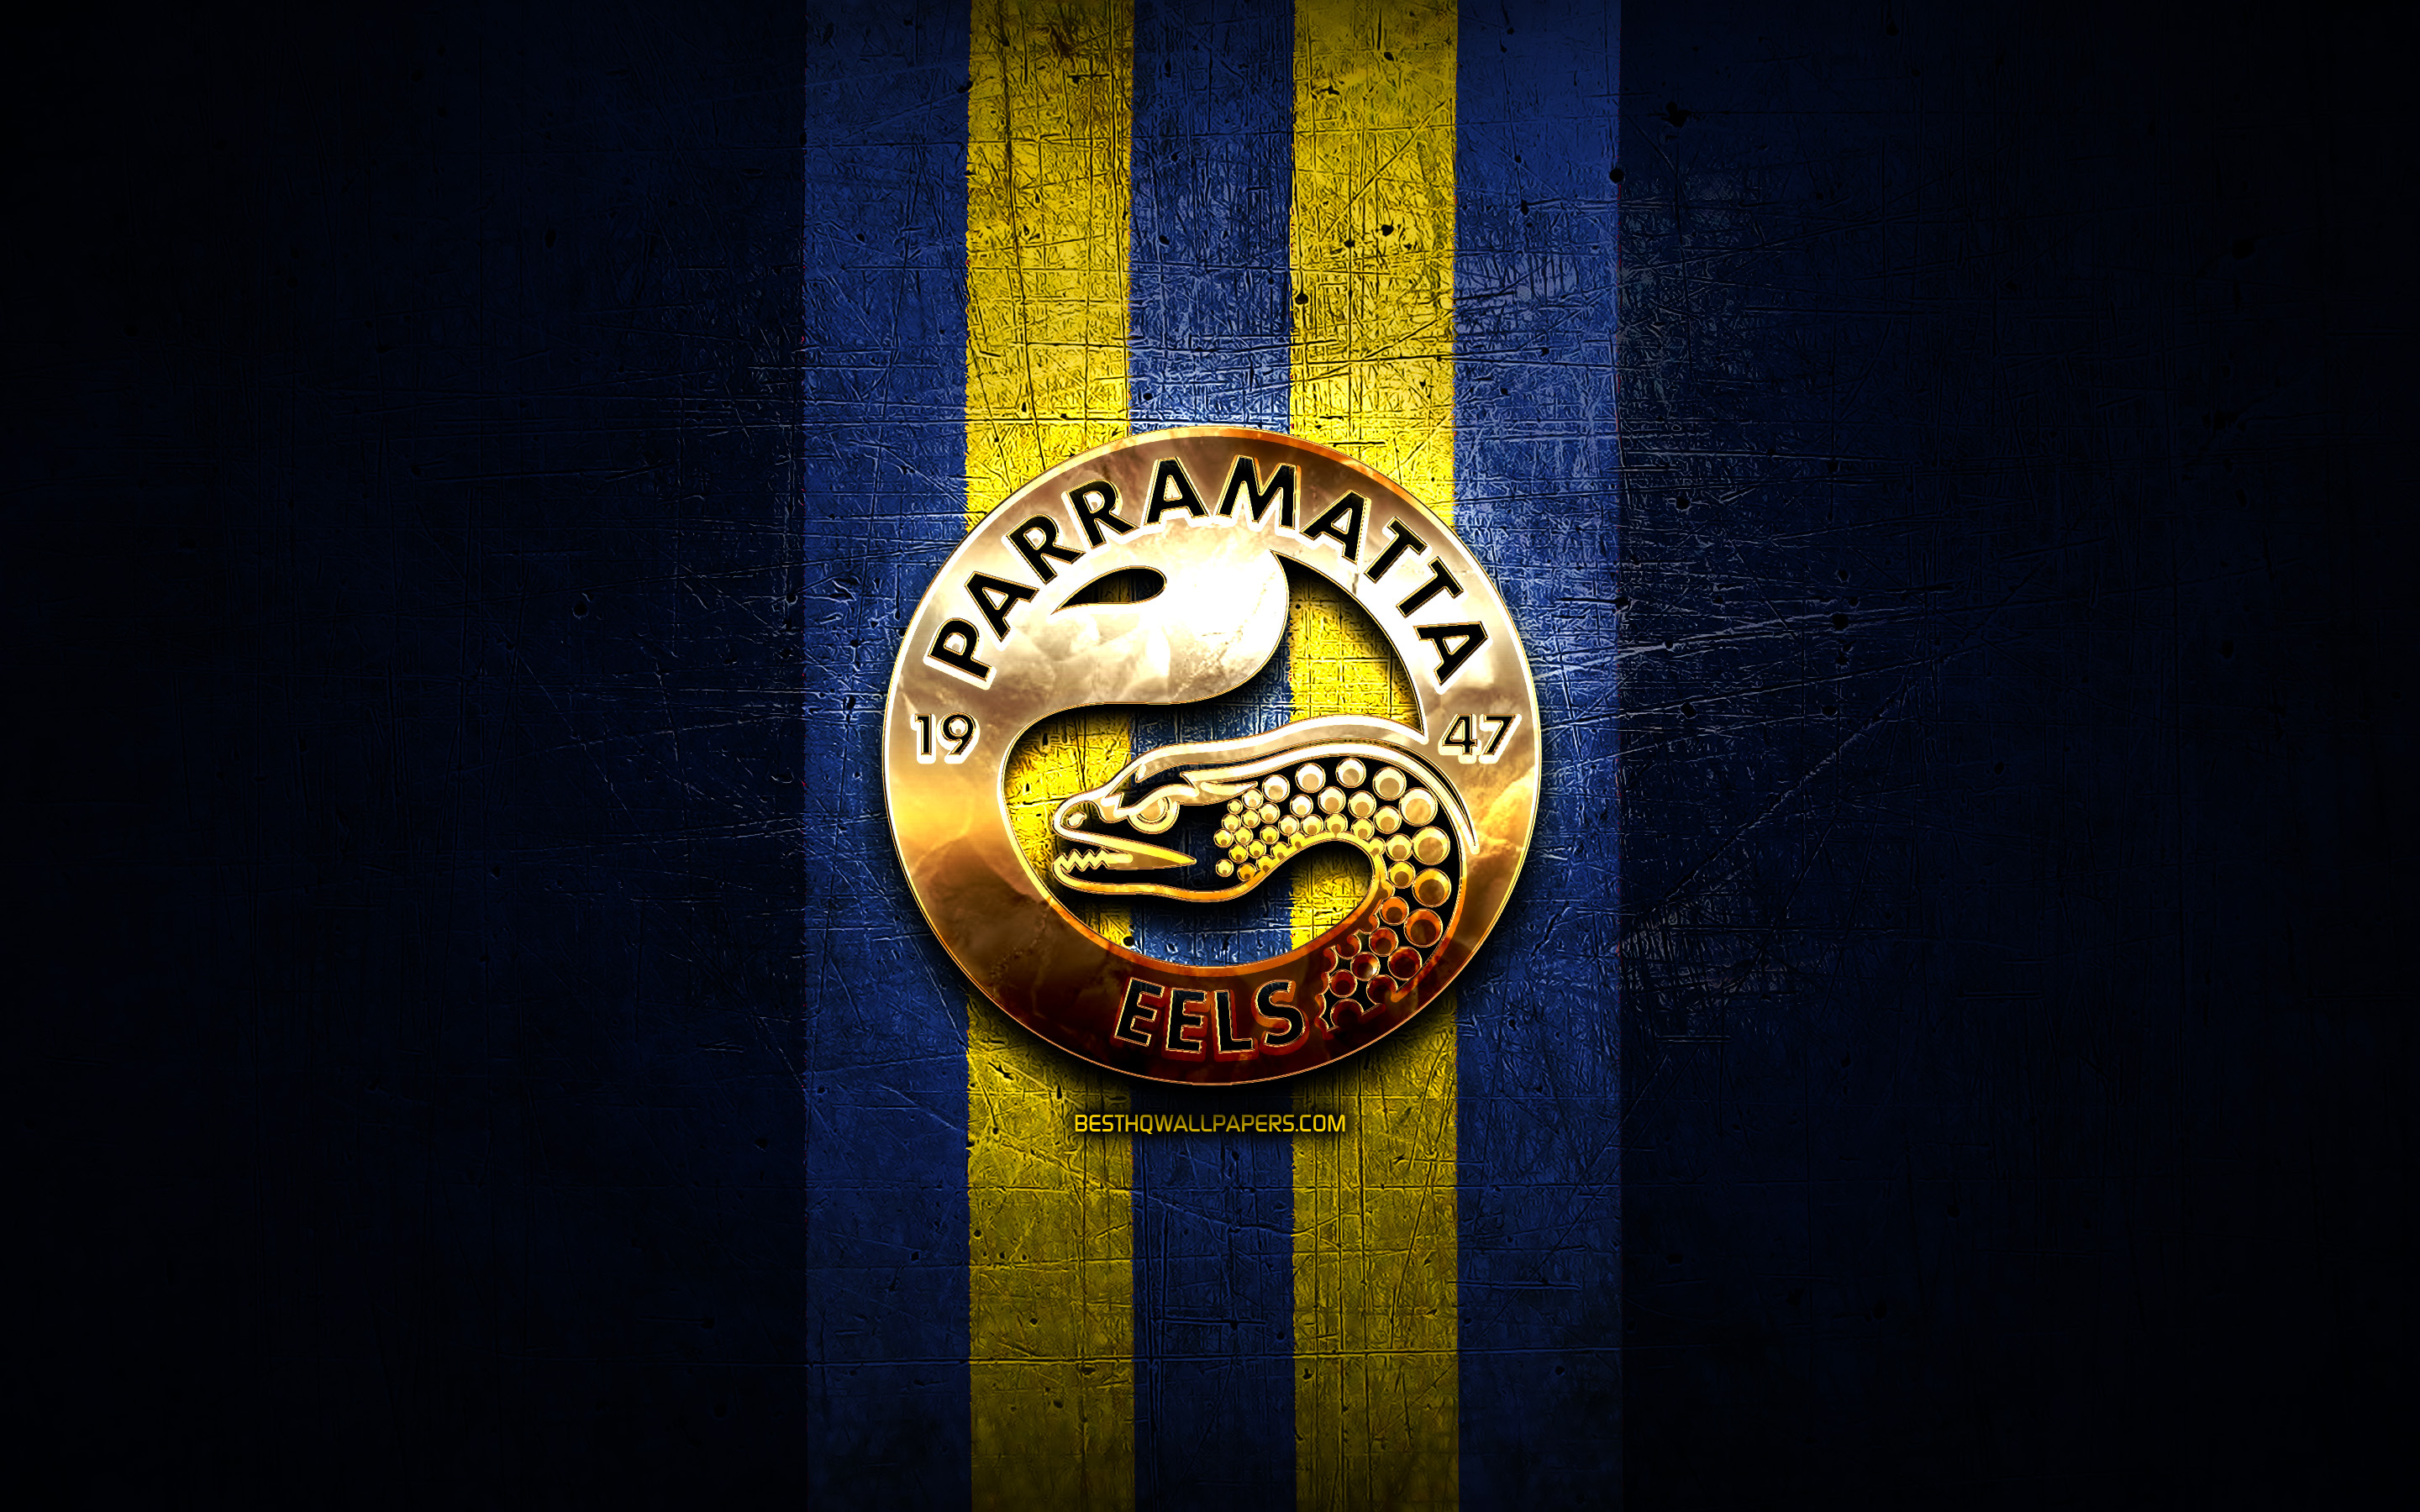 Download wallpaper Parramatta Eels, golden logo, National Rugby League, blue metal background, australian rugby club, Parramatta Eels logo, rugby, NRL for desktop with resolution 2880x1800. High Quality HD picture wallpaper